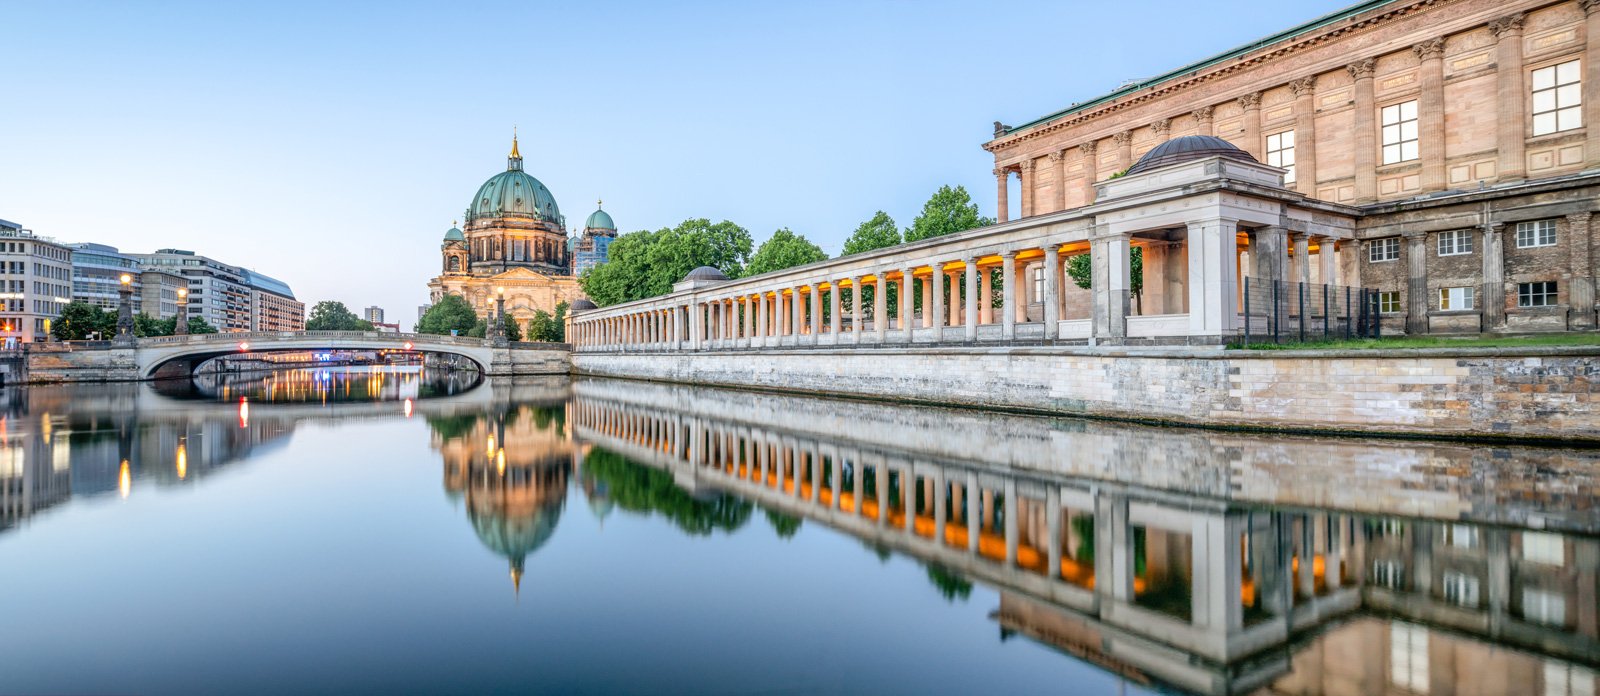 The Spree River in Berlin, where Jo Eckhart has published a number of self-guided audio tours